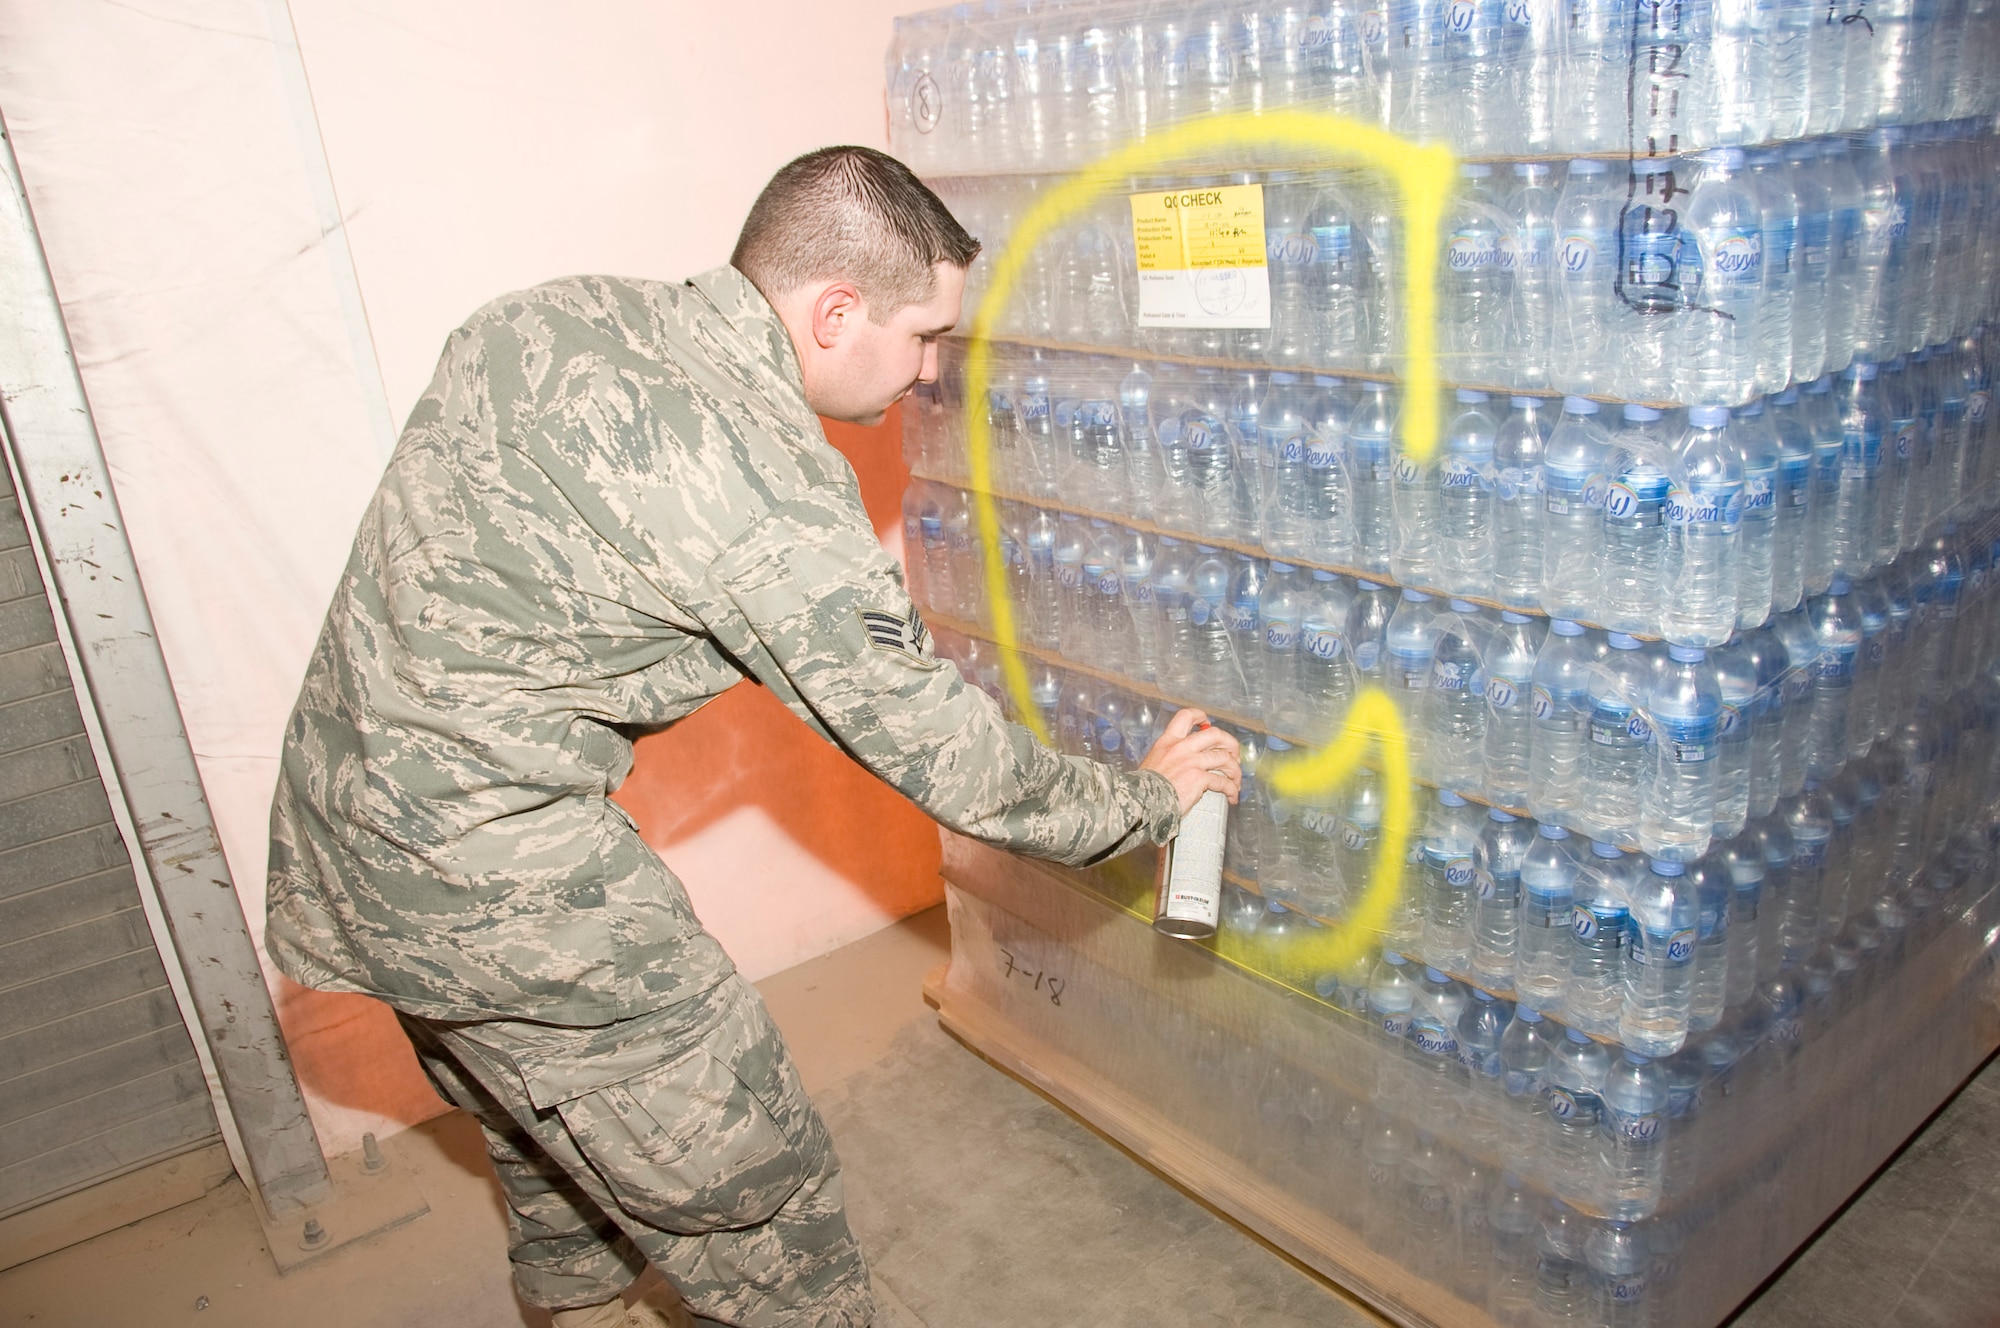 Senior Airman Ryan Smith, 379th Expeditionary Medical Group Bioenvironmental environmental program manager, spray paints a pallet of bottled water July 20, 2012. After each lot of water has been cleared and deemed safe for consumption, Smith marks the pallet of water with a large, yellow ‘C’. He conducts bacteriological tests on every batch of water received. (U.S. Air Force photo/Senior Airman Bryan Swink)